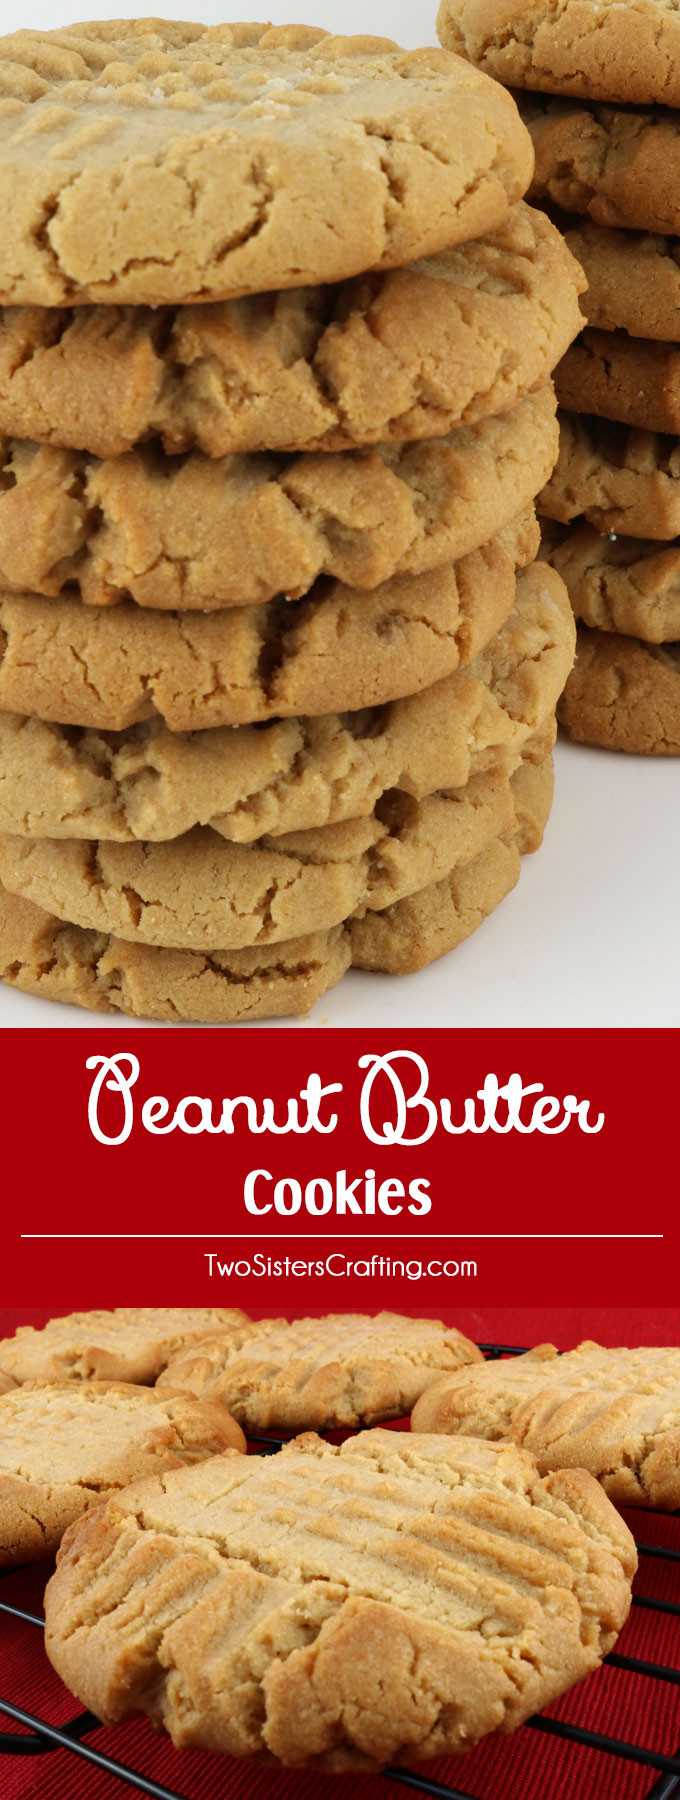 Peanut Butter Cookies For Two
 Peanut Butter Cookies Two Sisters